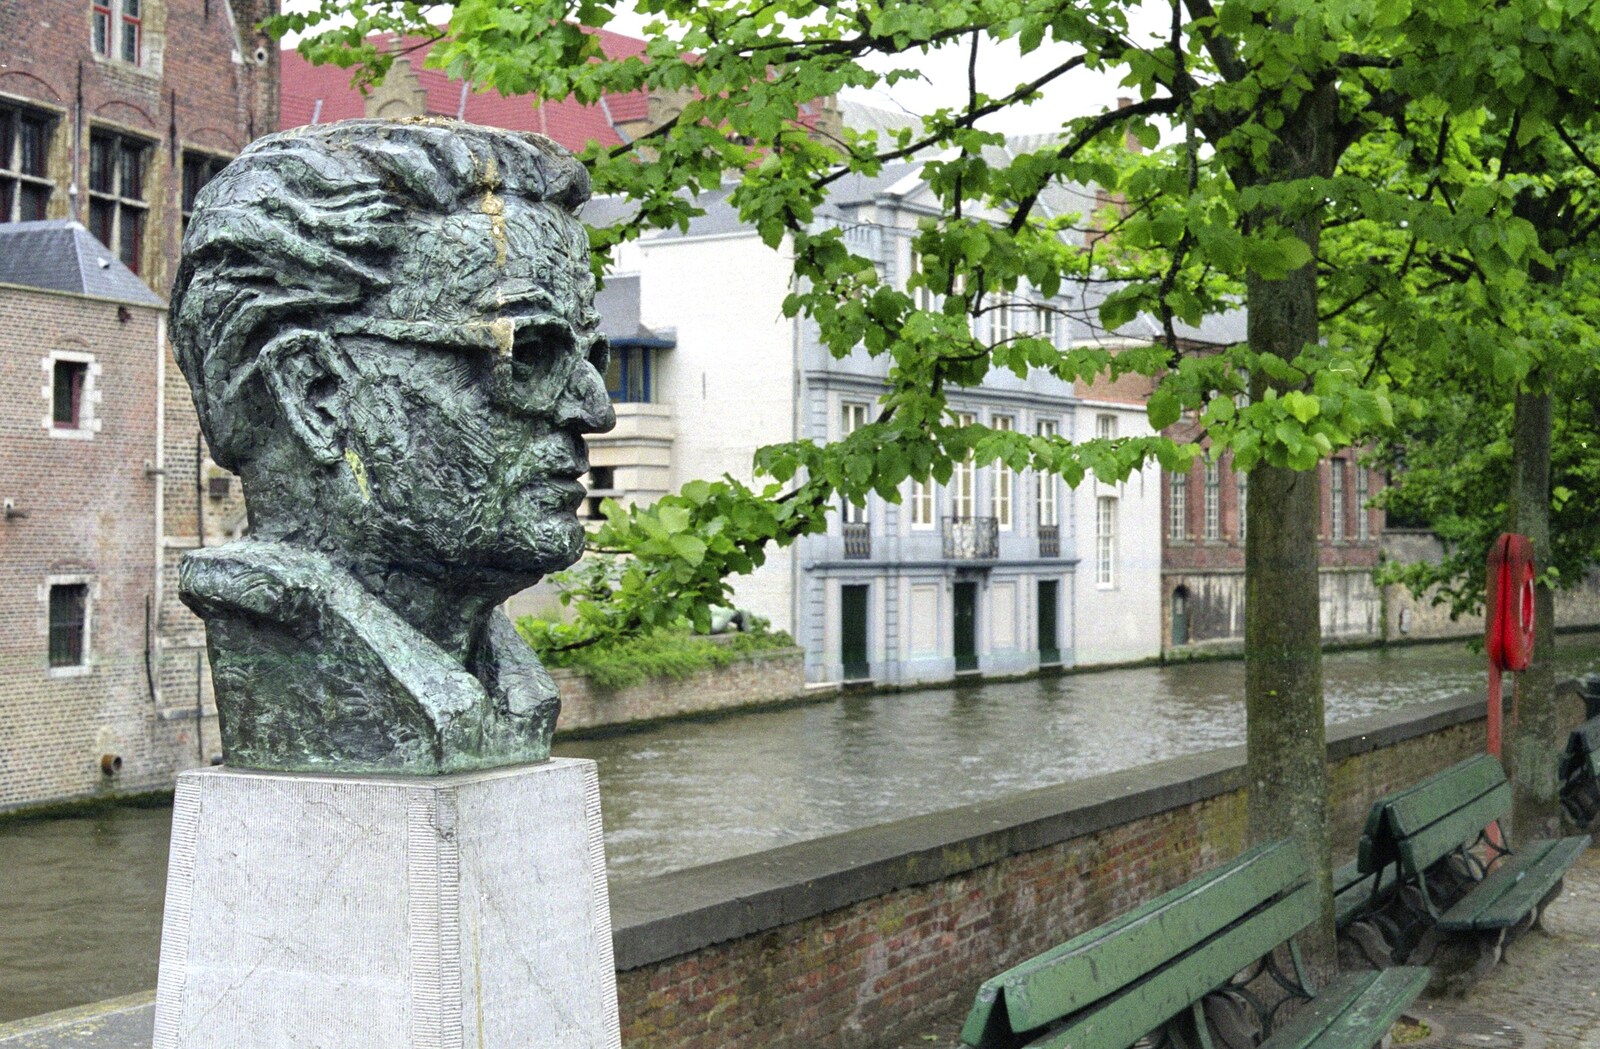 A bronze head of Frank van Acker from CISU: An SCC Day-Trip to Bruges, Belgium - 26th May 2000